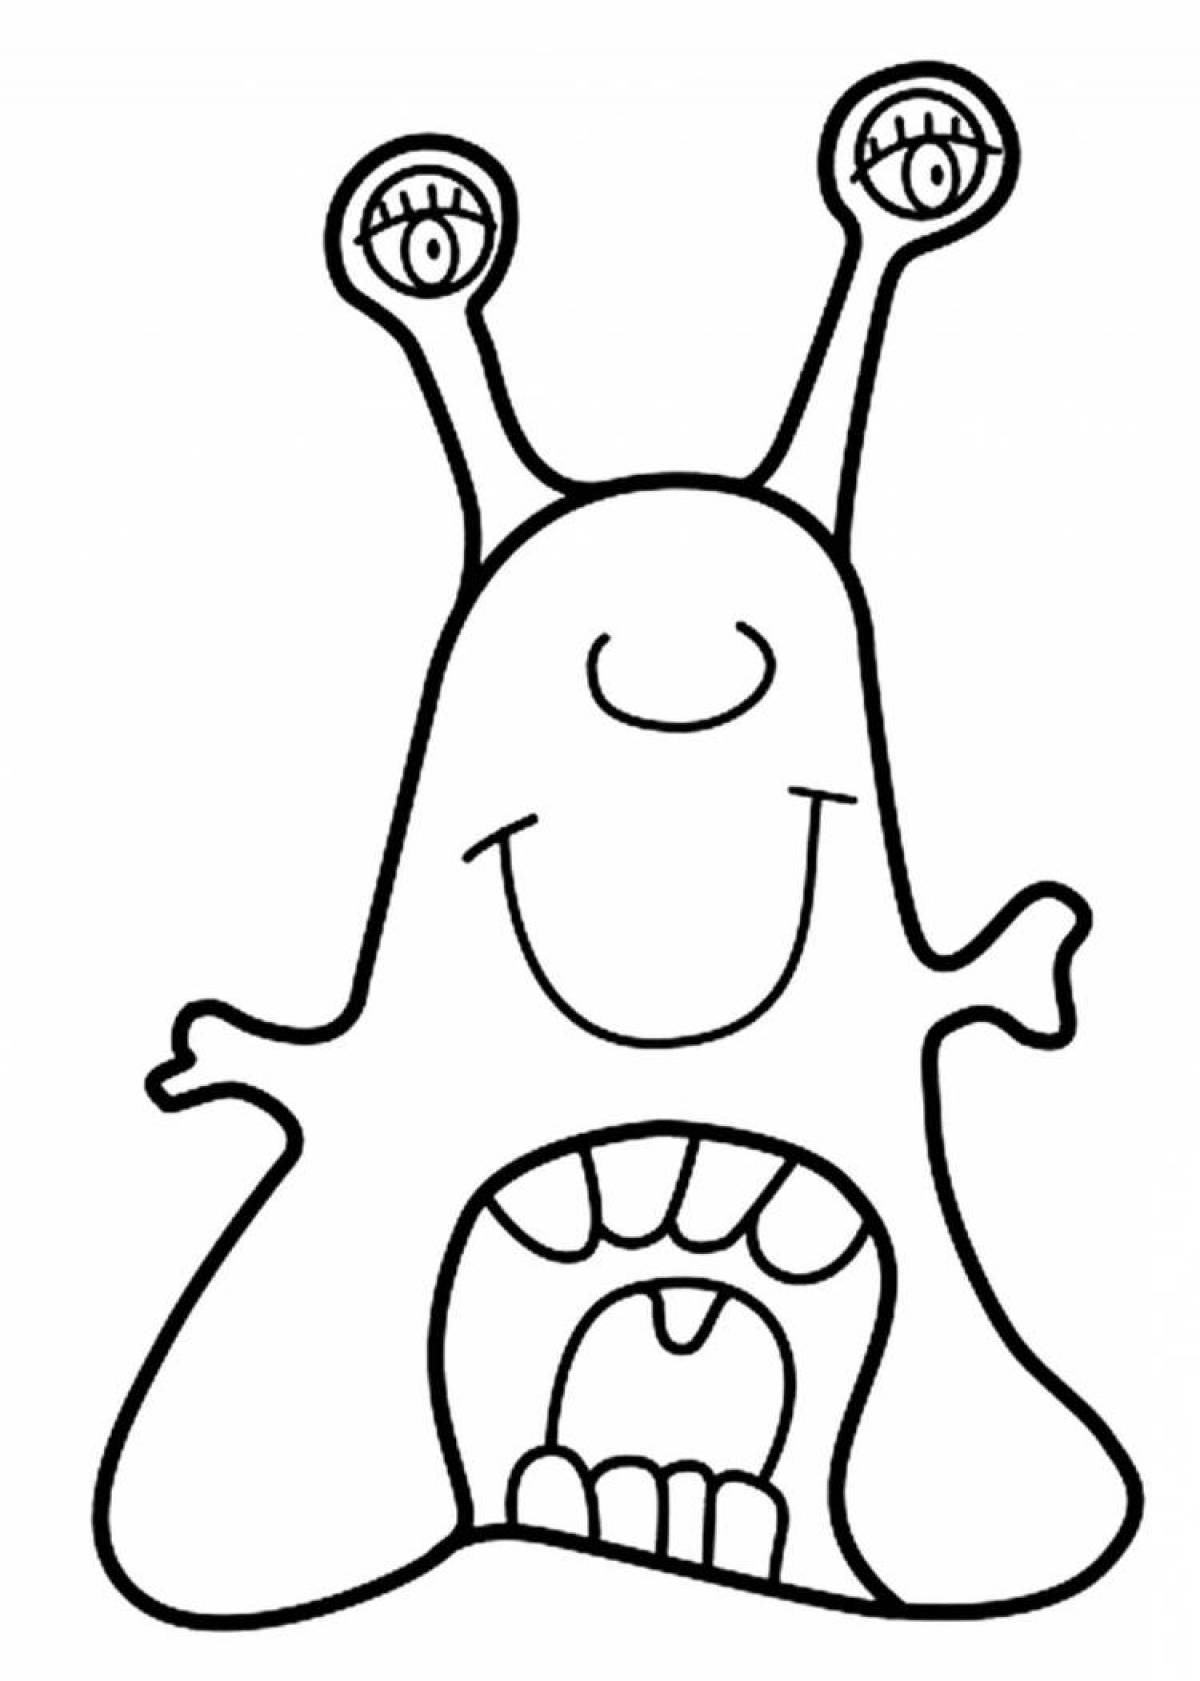 Exciting alien coloring page